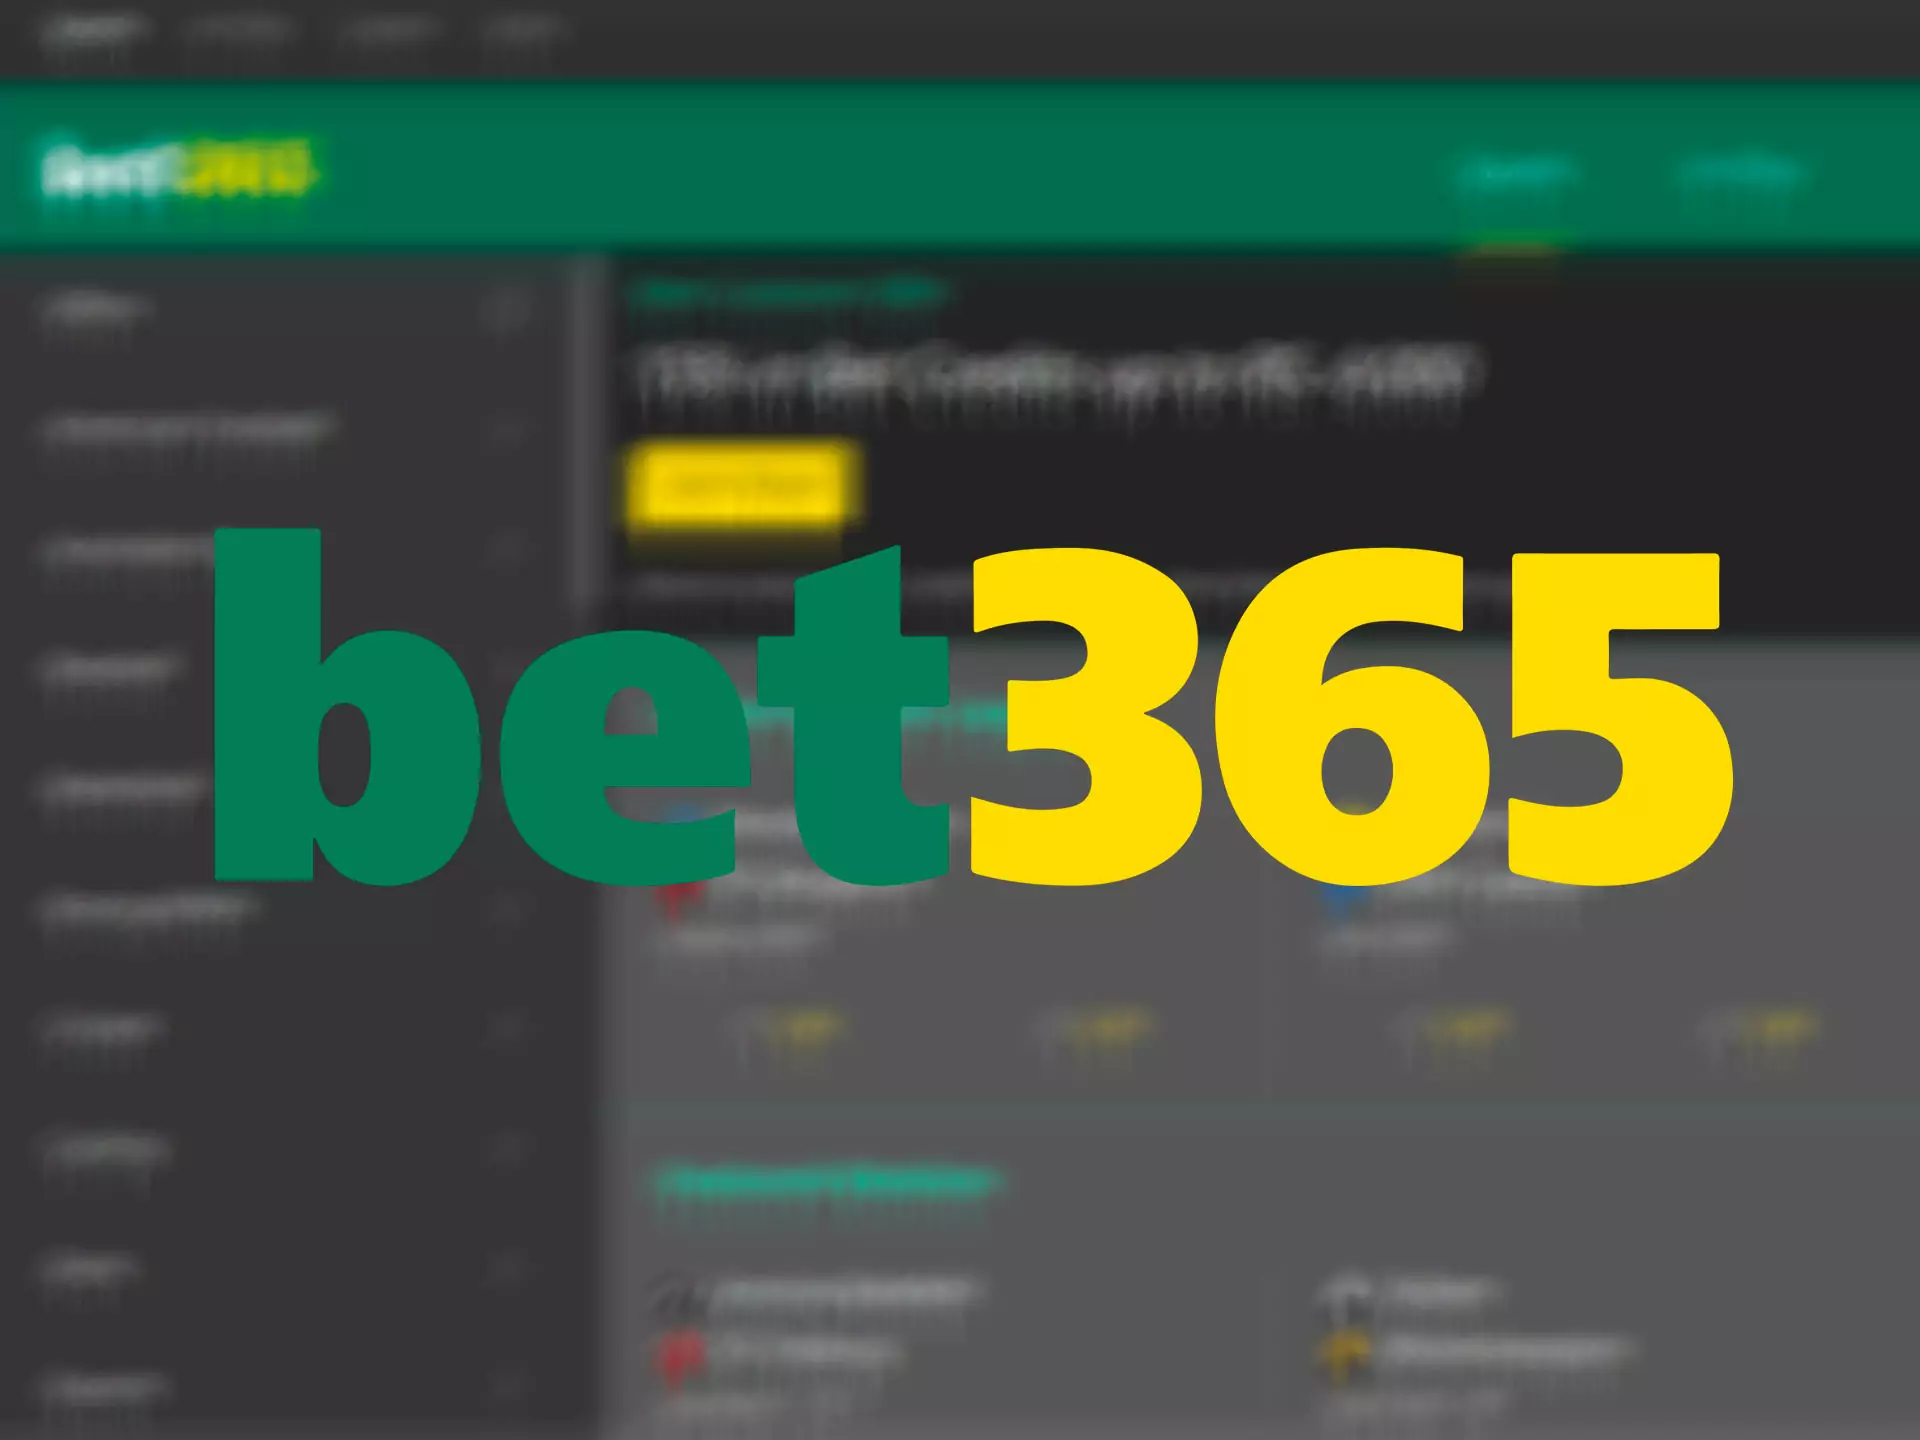 Make a deposit at Bet365 and win big money from betting.